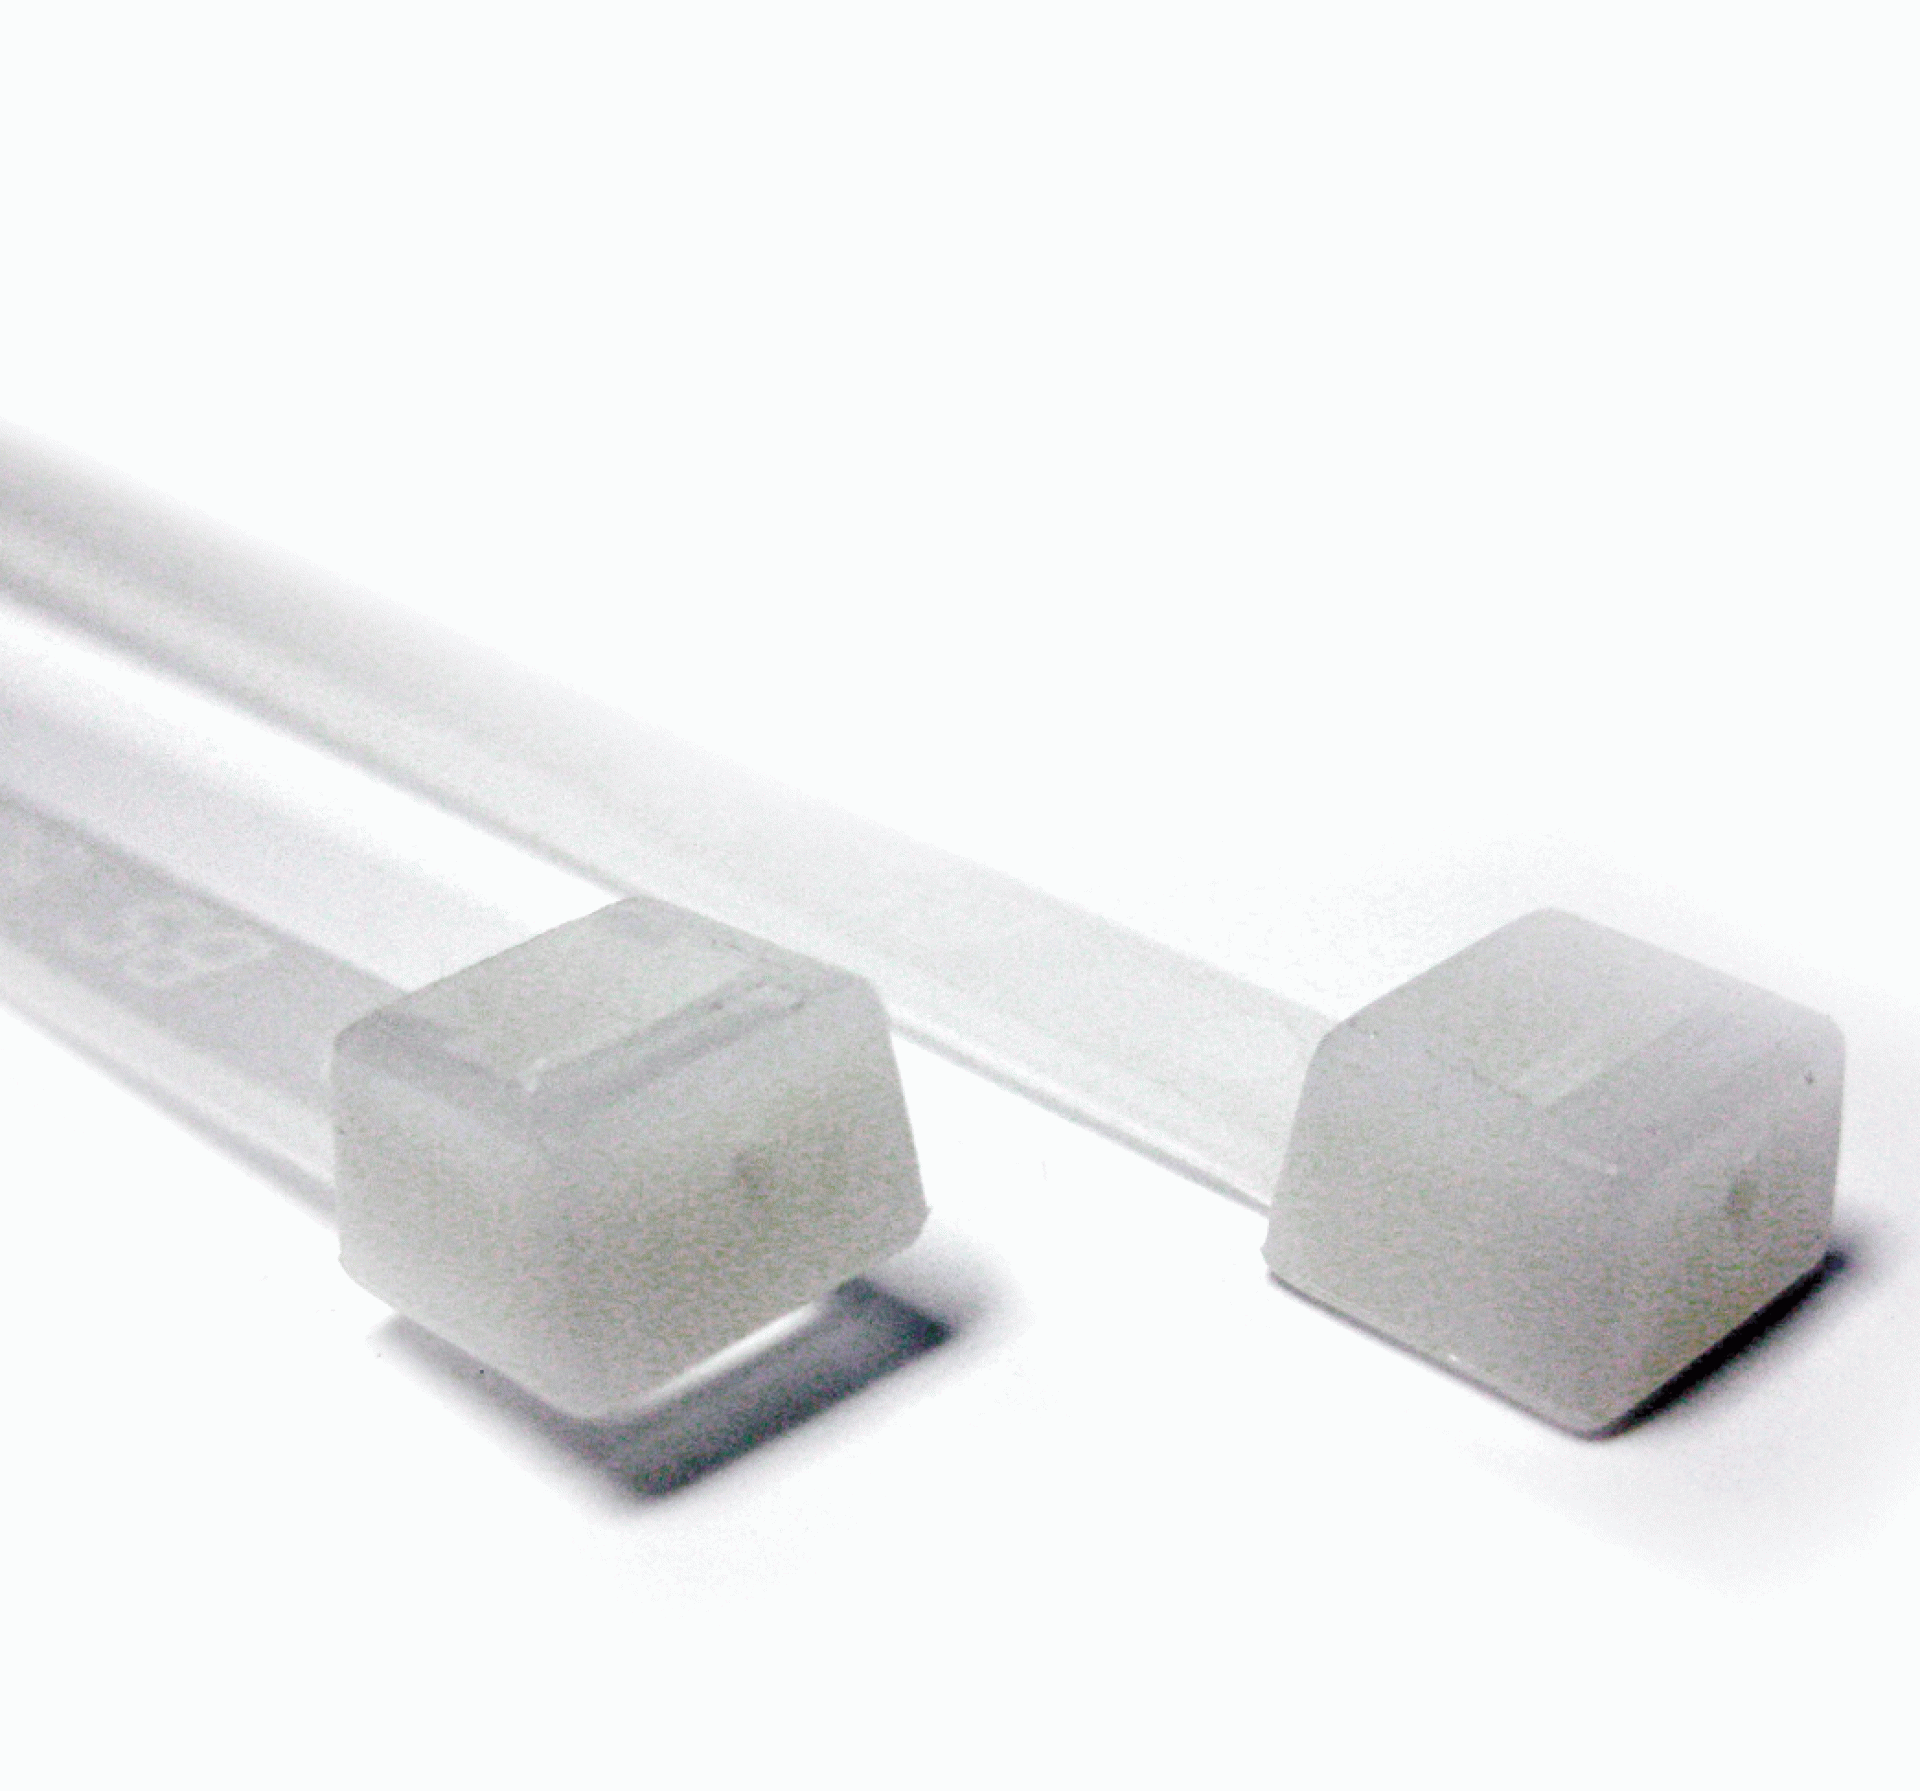 CAMCO MFG INC | 64877 | CABLE TIE 18 LB TENSILE STRENGTH 4" LONG .10" WIDE NATURAL